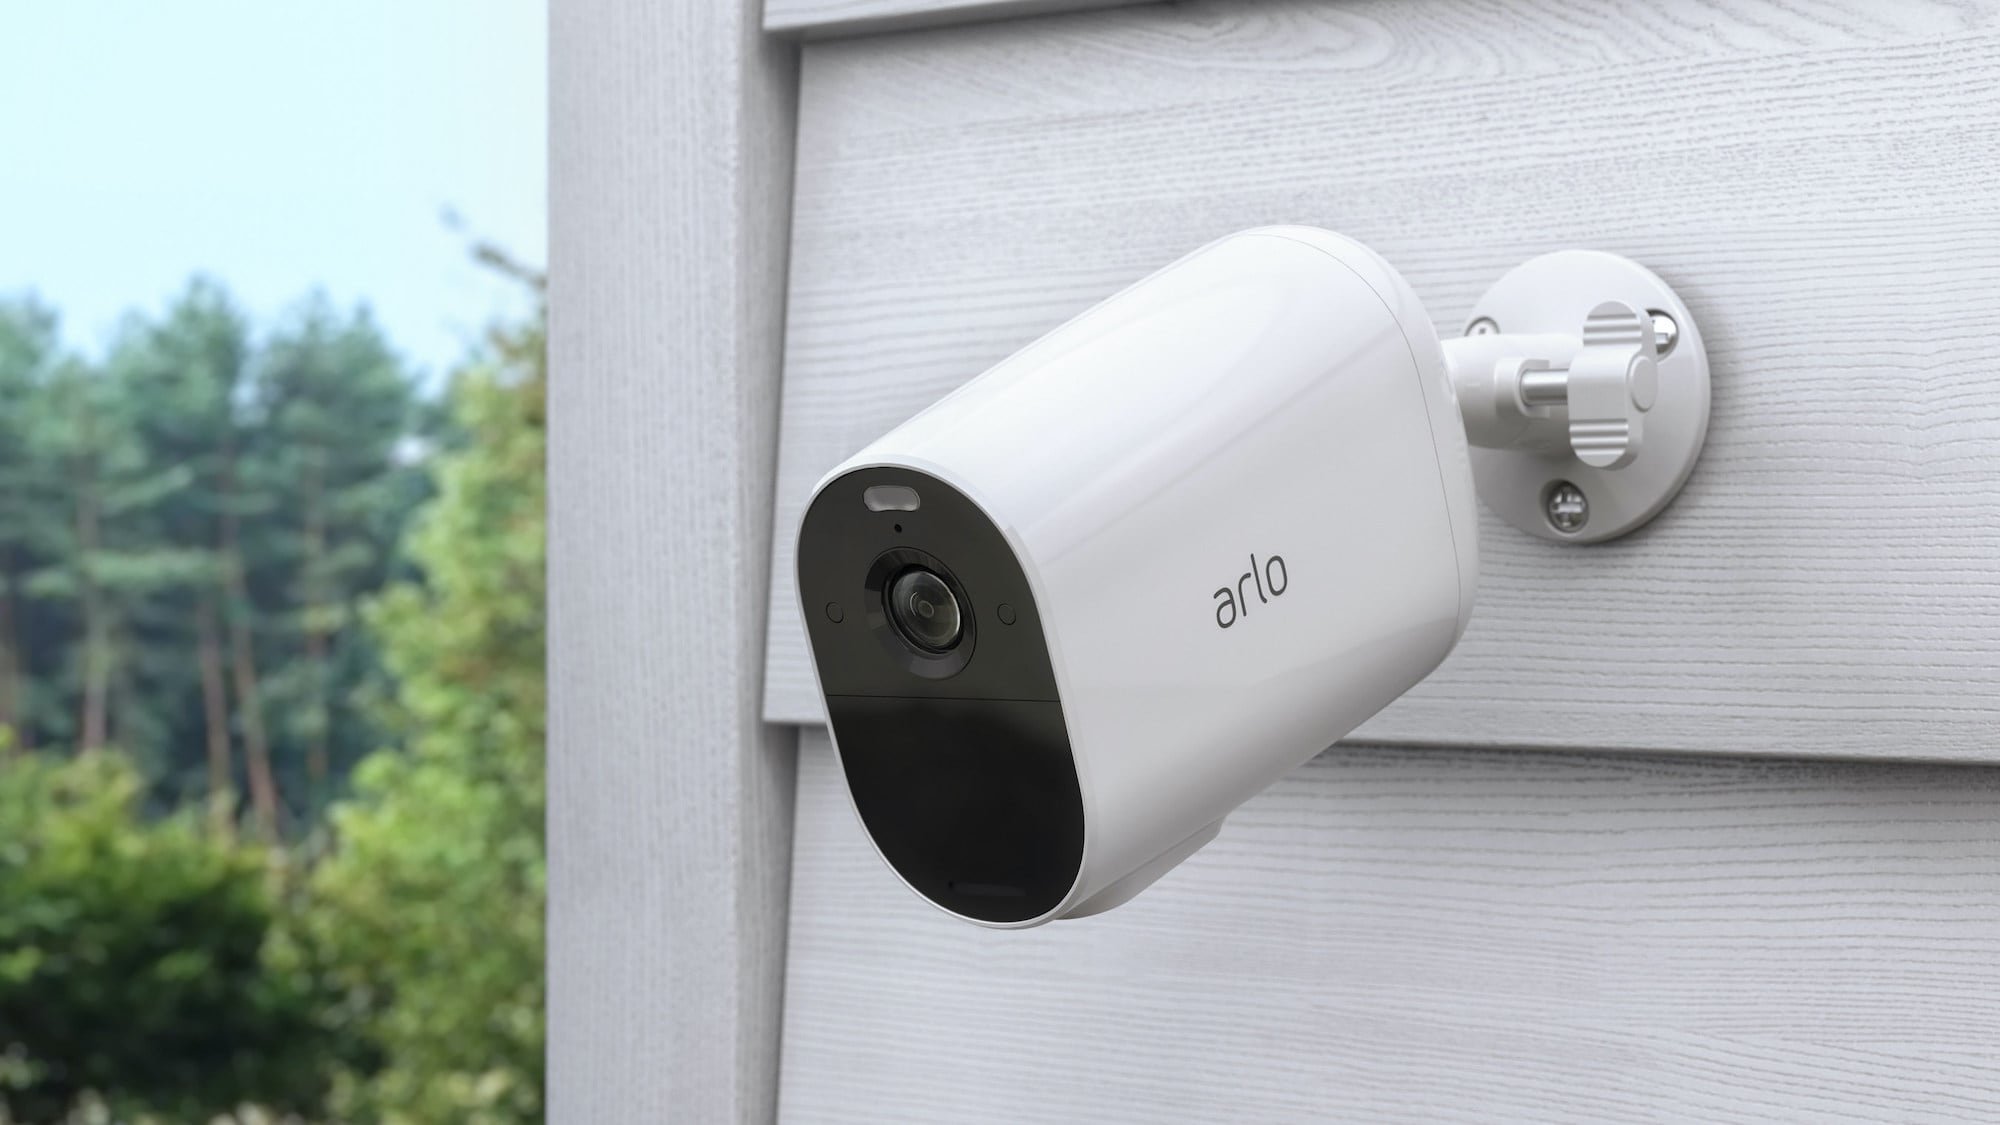 Arlo Essential Series home security cameras deliver high-definition details at night